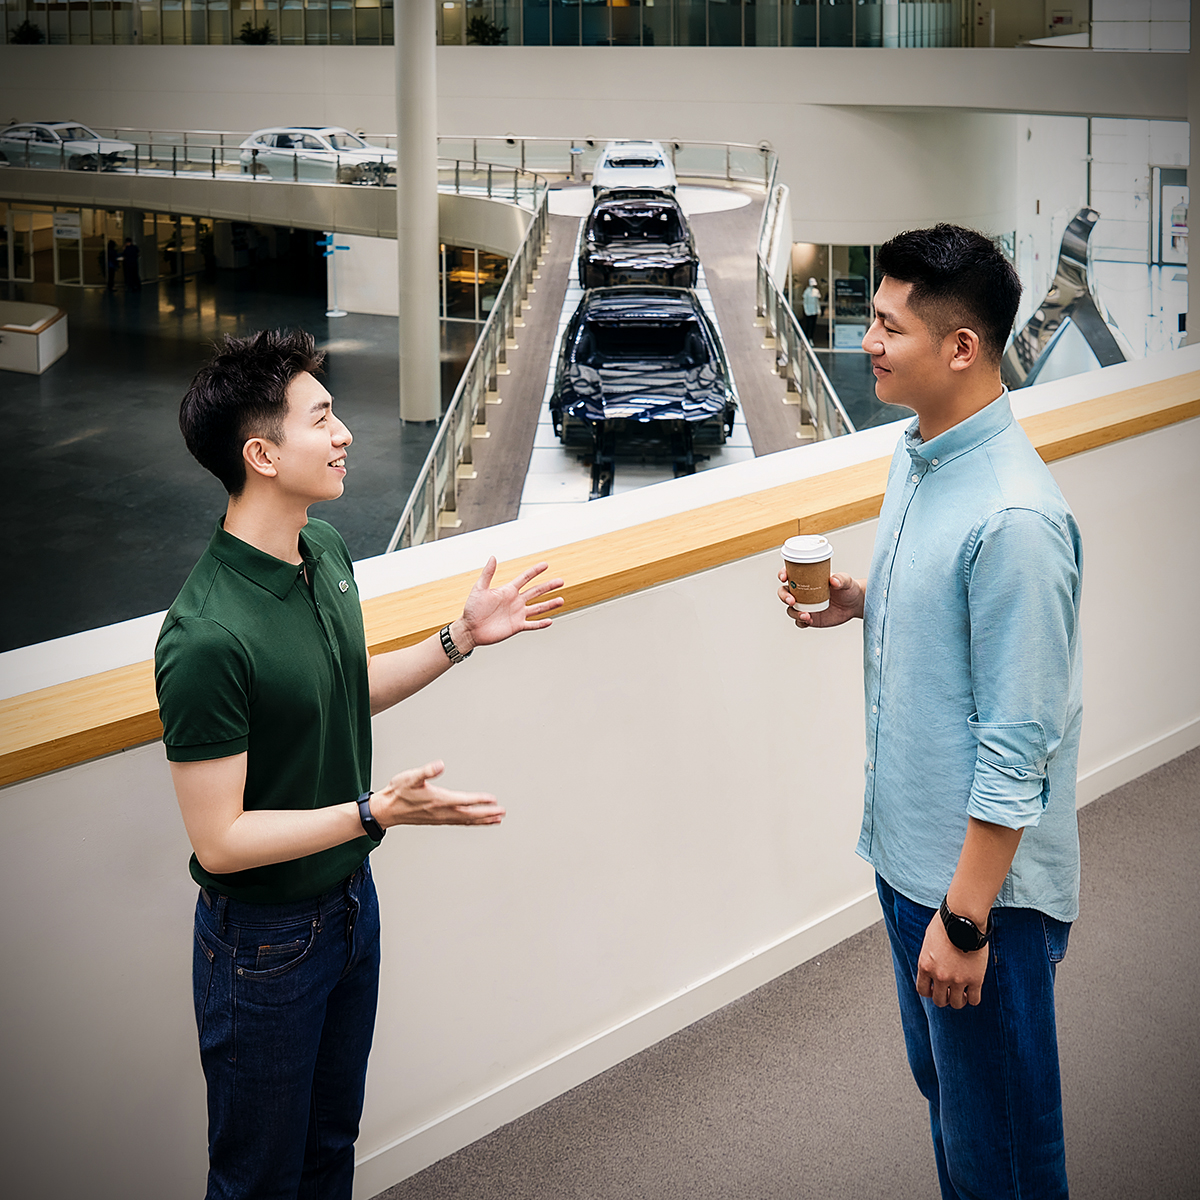 The picture shows two students working together at BMW.